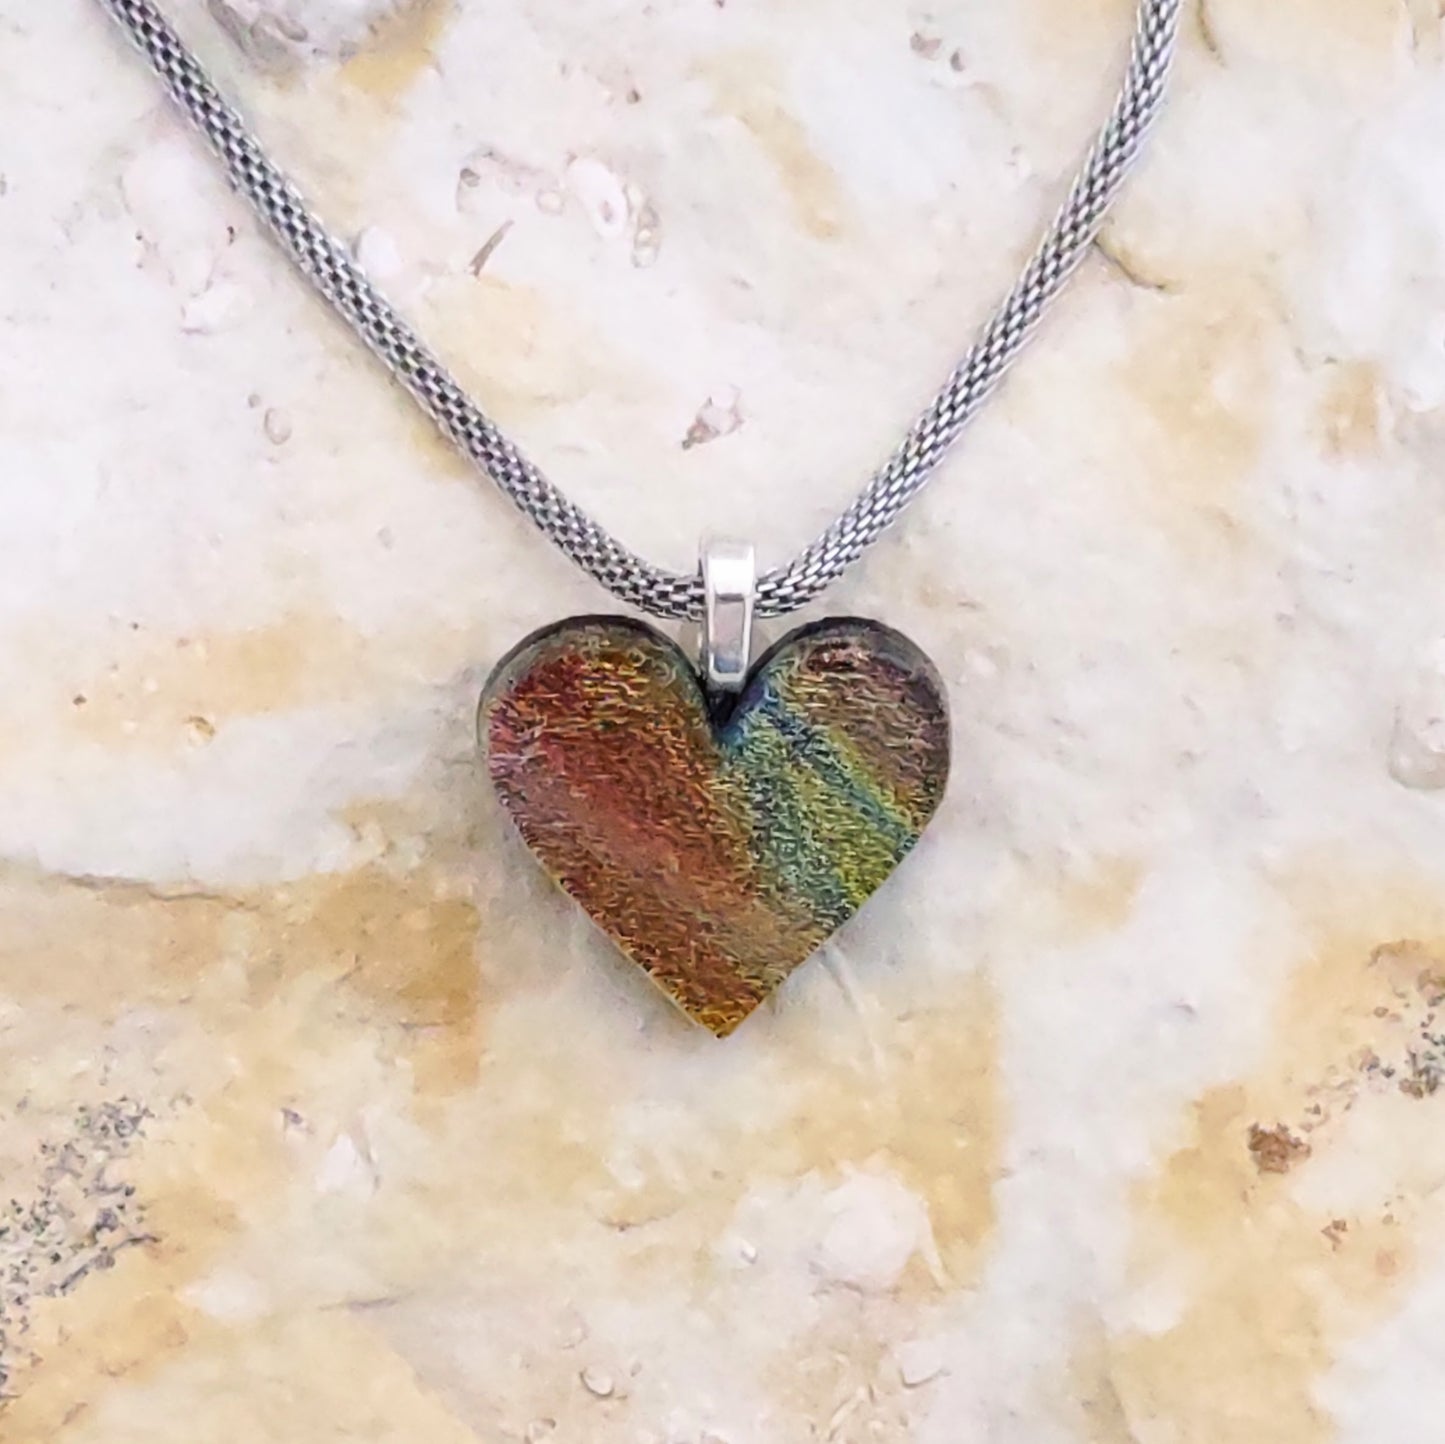 Multi-Color Dichroic Heart Shaped Pendant with Mesh Chain